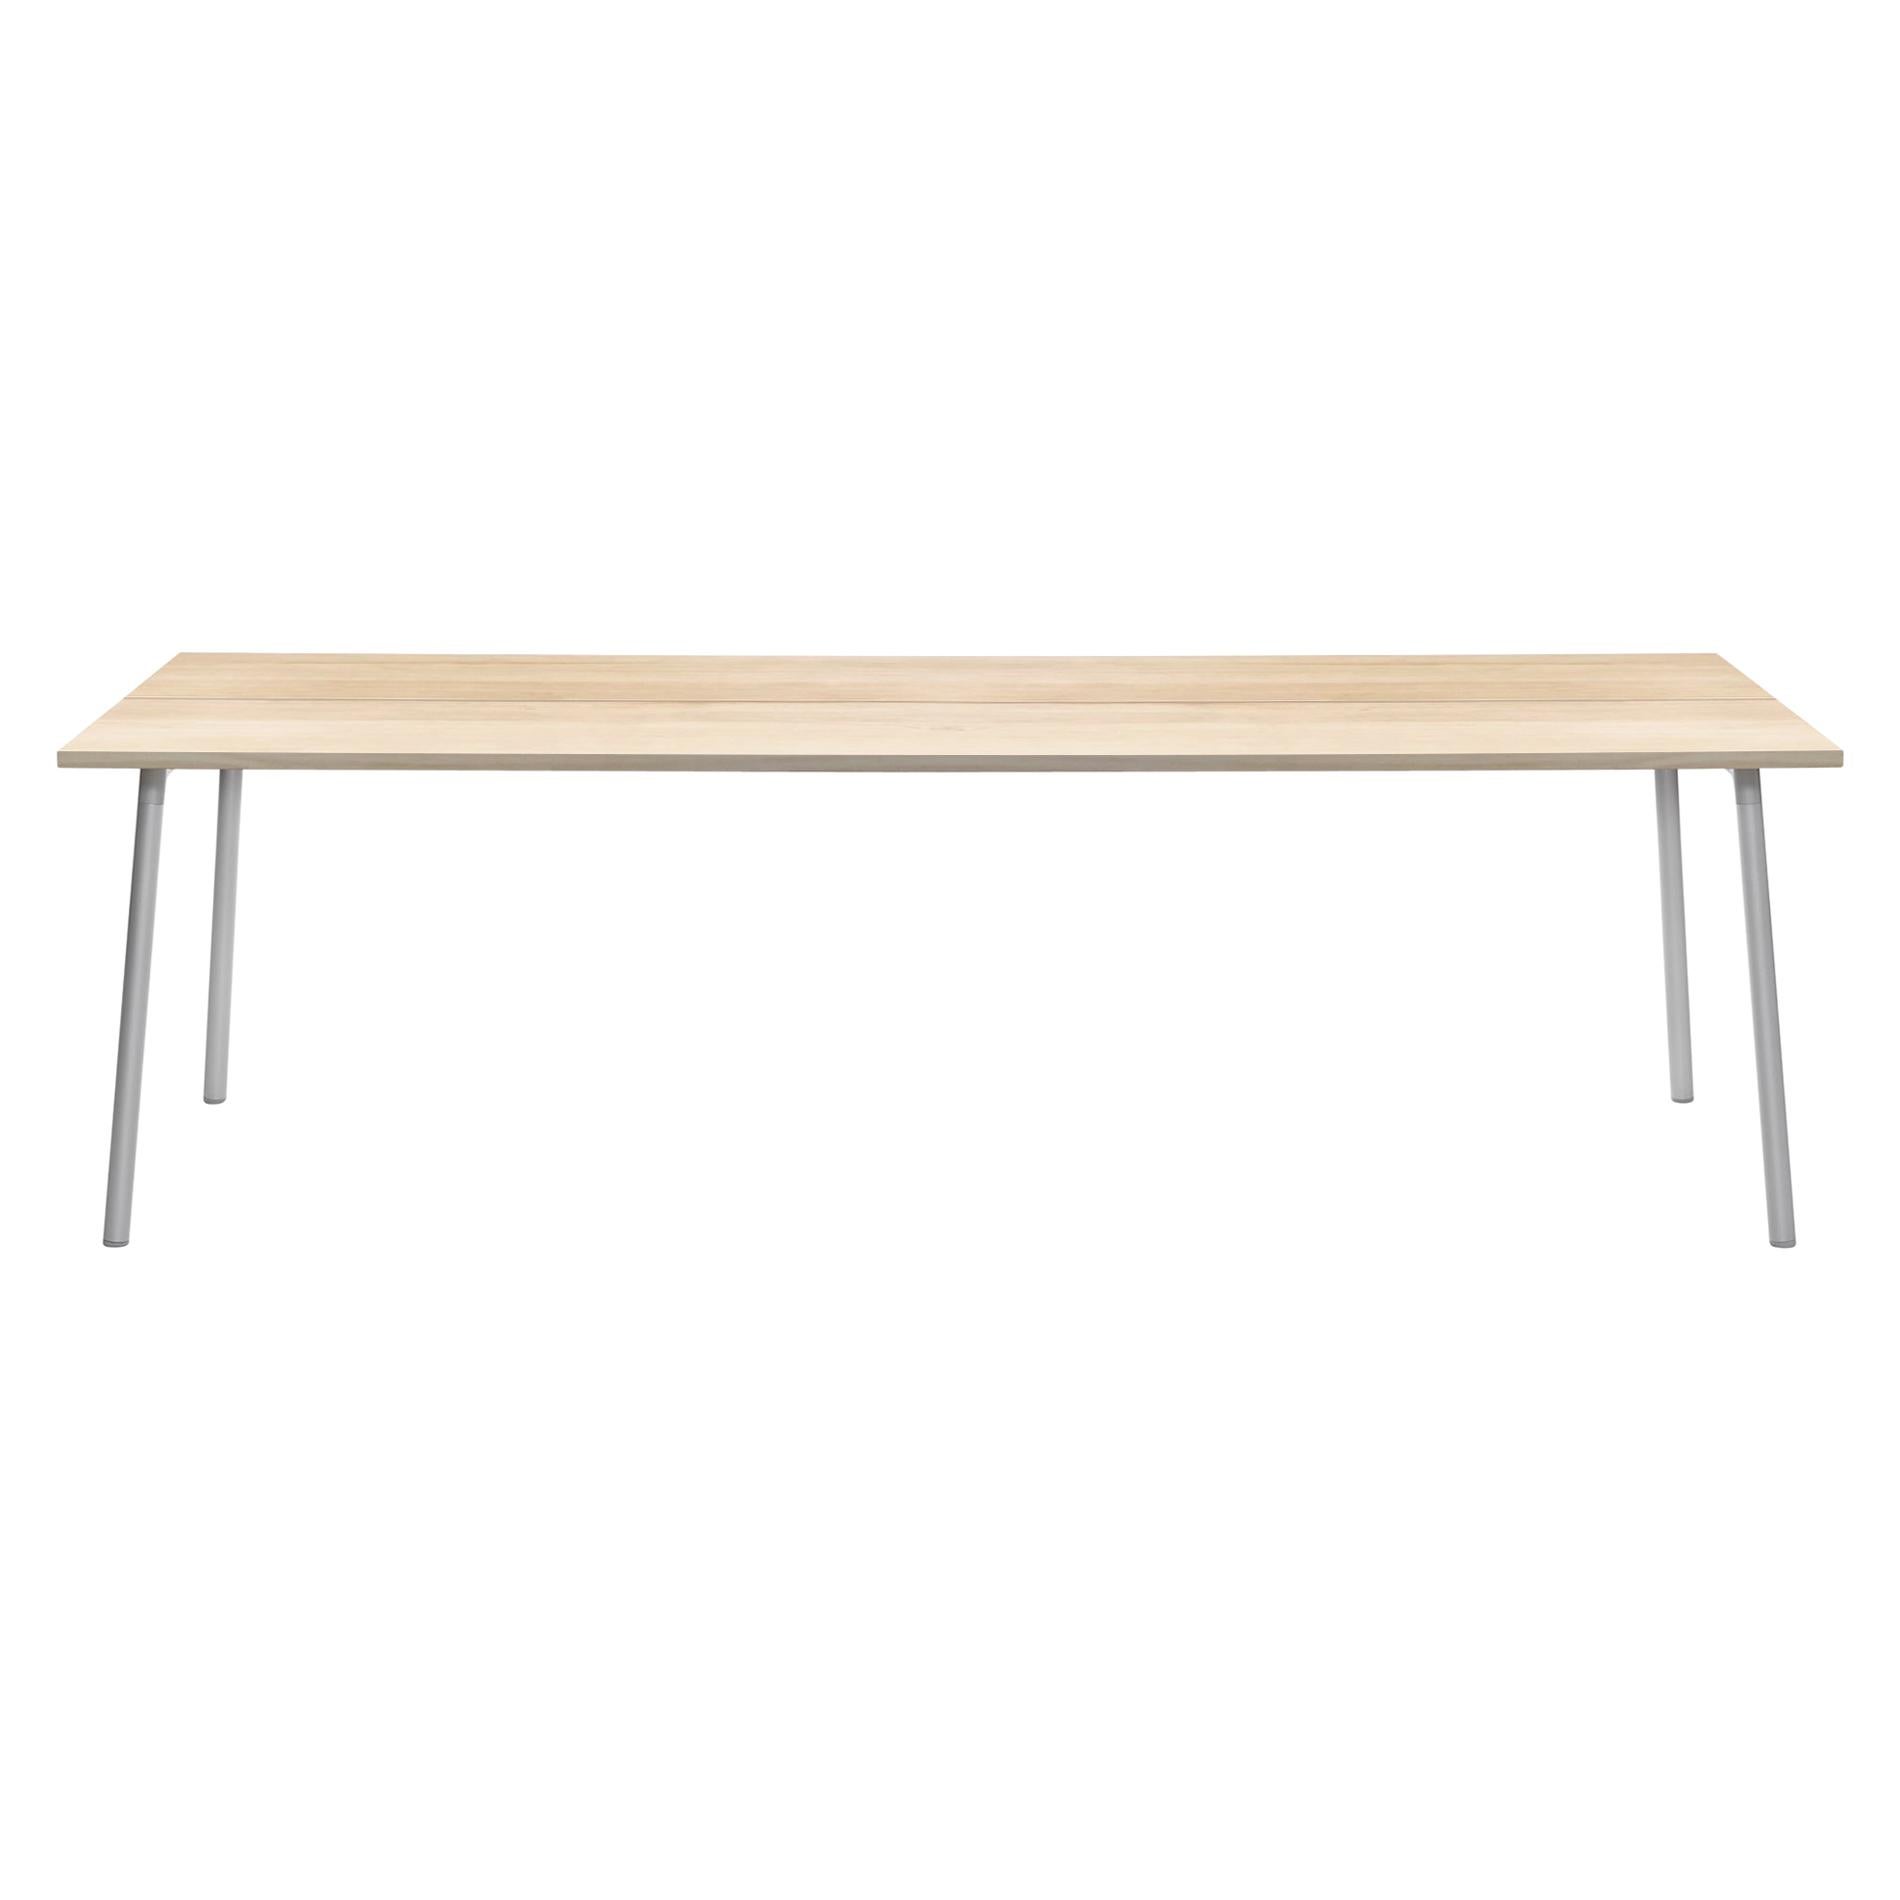 Emeco Run 96" Table with Aluminum Frame & Wood Top by Sam Hecht and Kim Colin